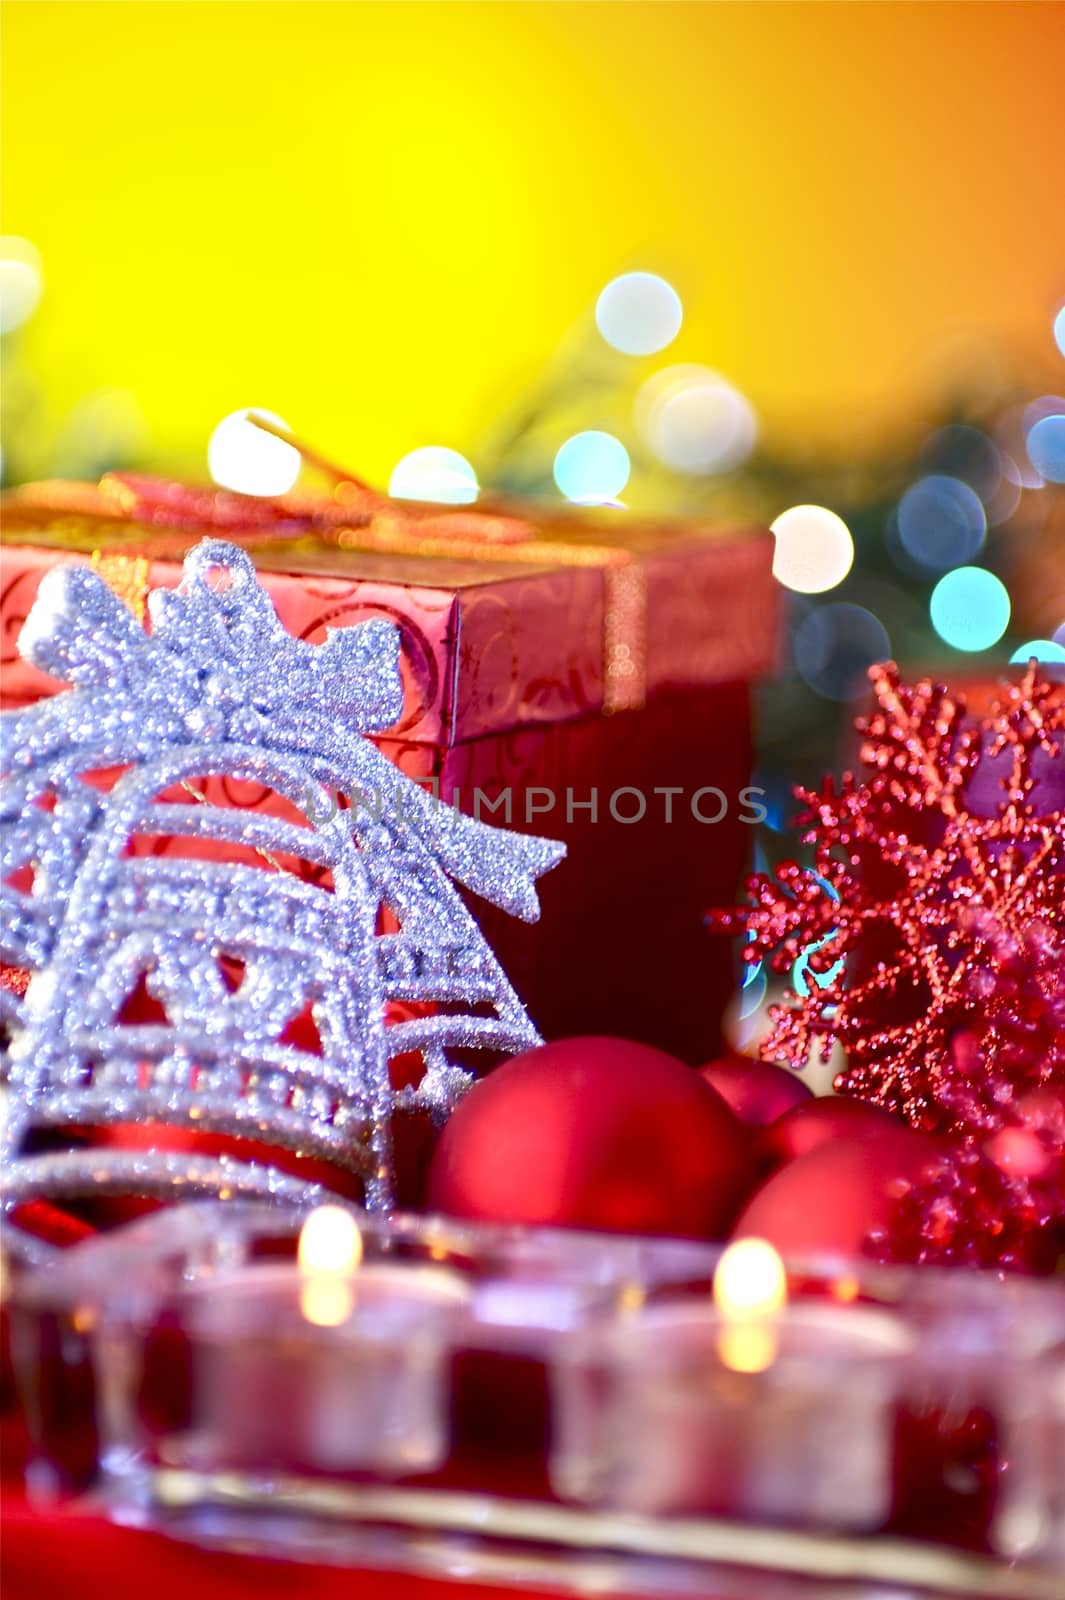 Christmas Composition. Christmas Ornaments and Red Candles. Yellow Background